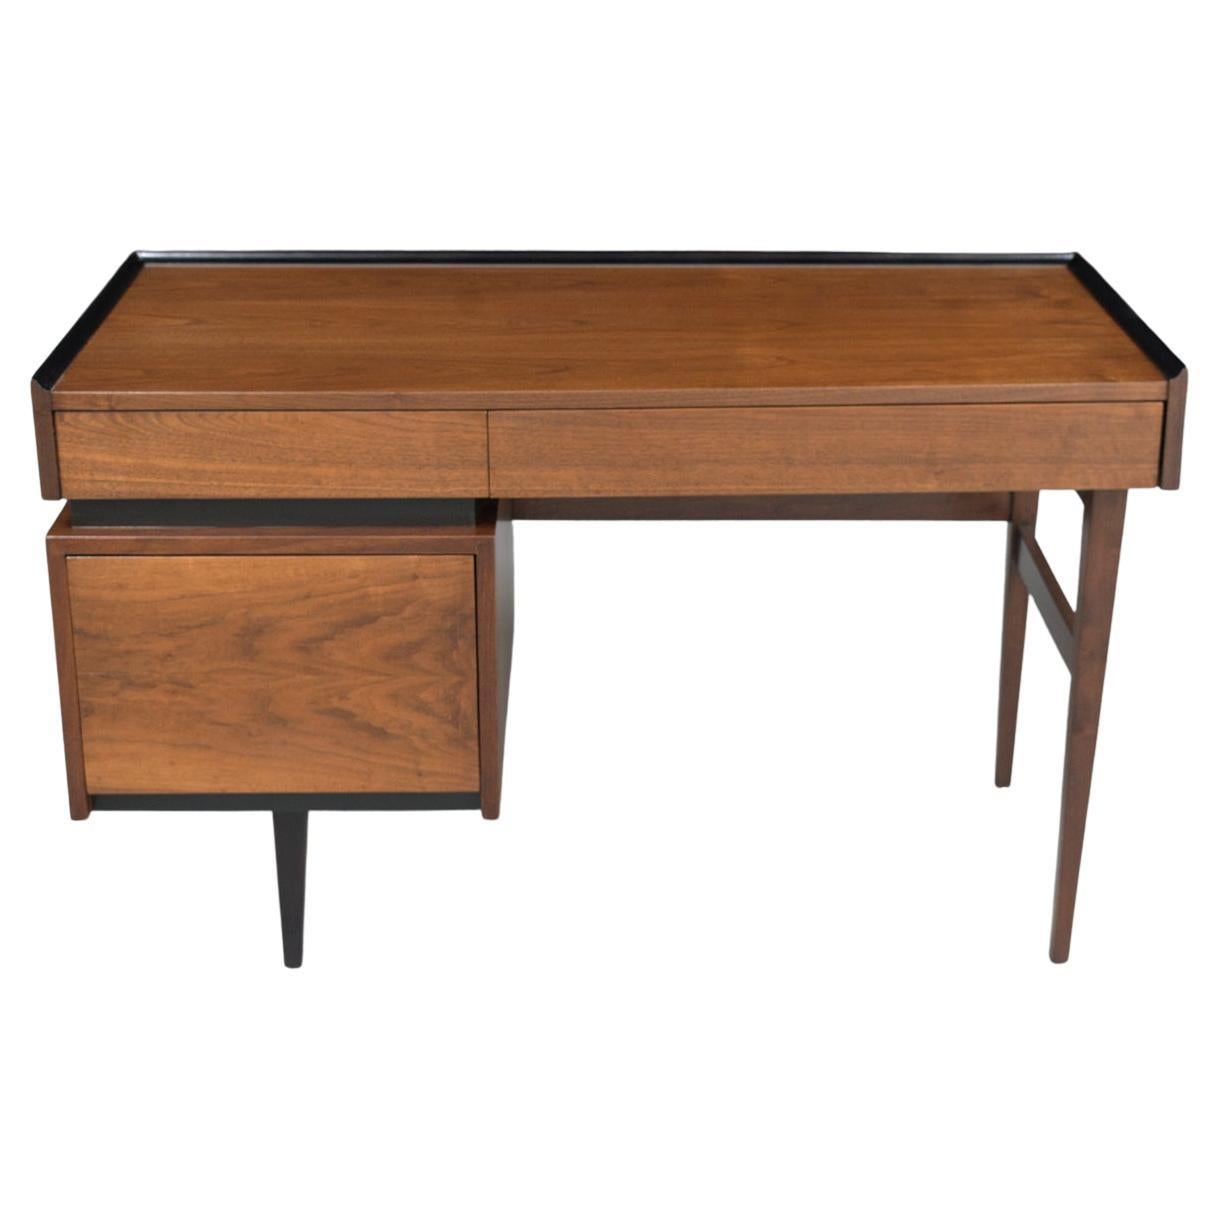 This extraordinary executive danish modern desk is hand-crafted out of walnut wood and is in great condition has been completed restored stripped and newly refinished by our professional craftsmen team in the house. This mid-century vintage desk is